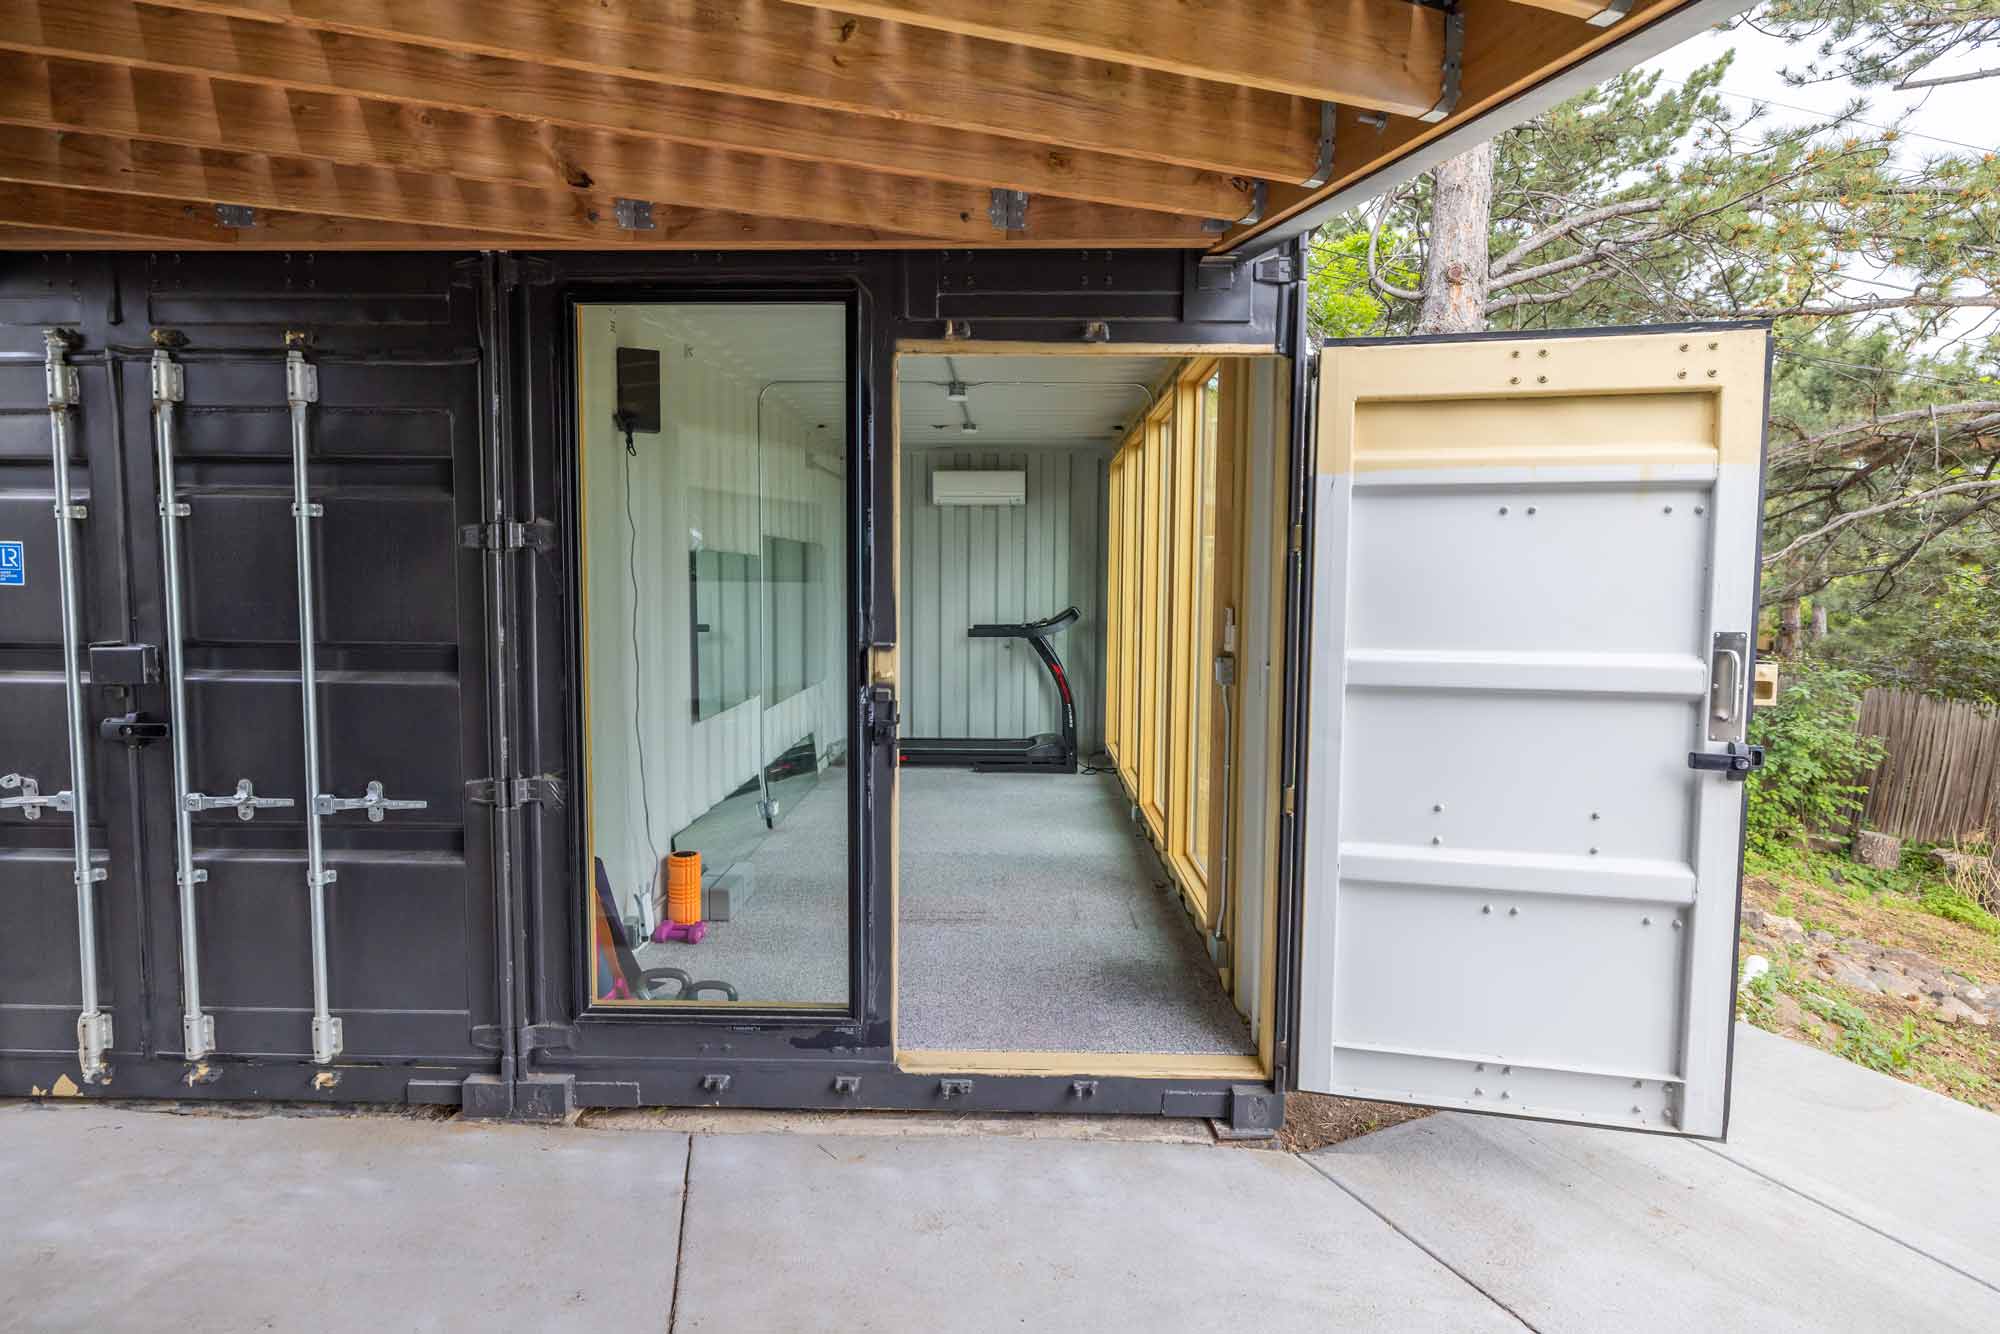 https://www.roxboxcontainers.com/wp-content/uploads/2022/06/B17-Bruder-Design-House-Garage-for-Web.jpg